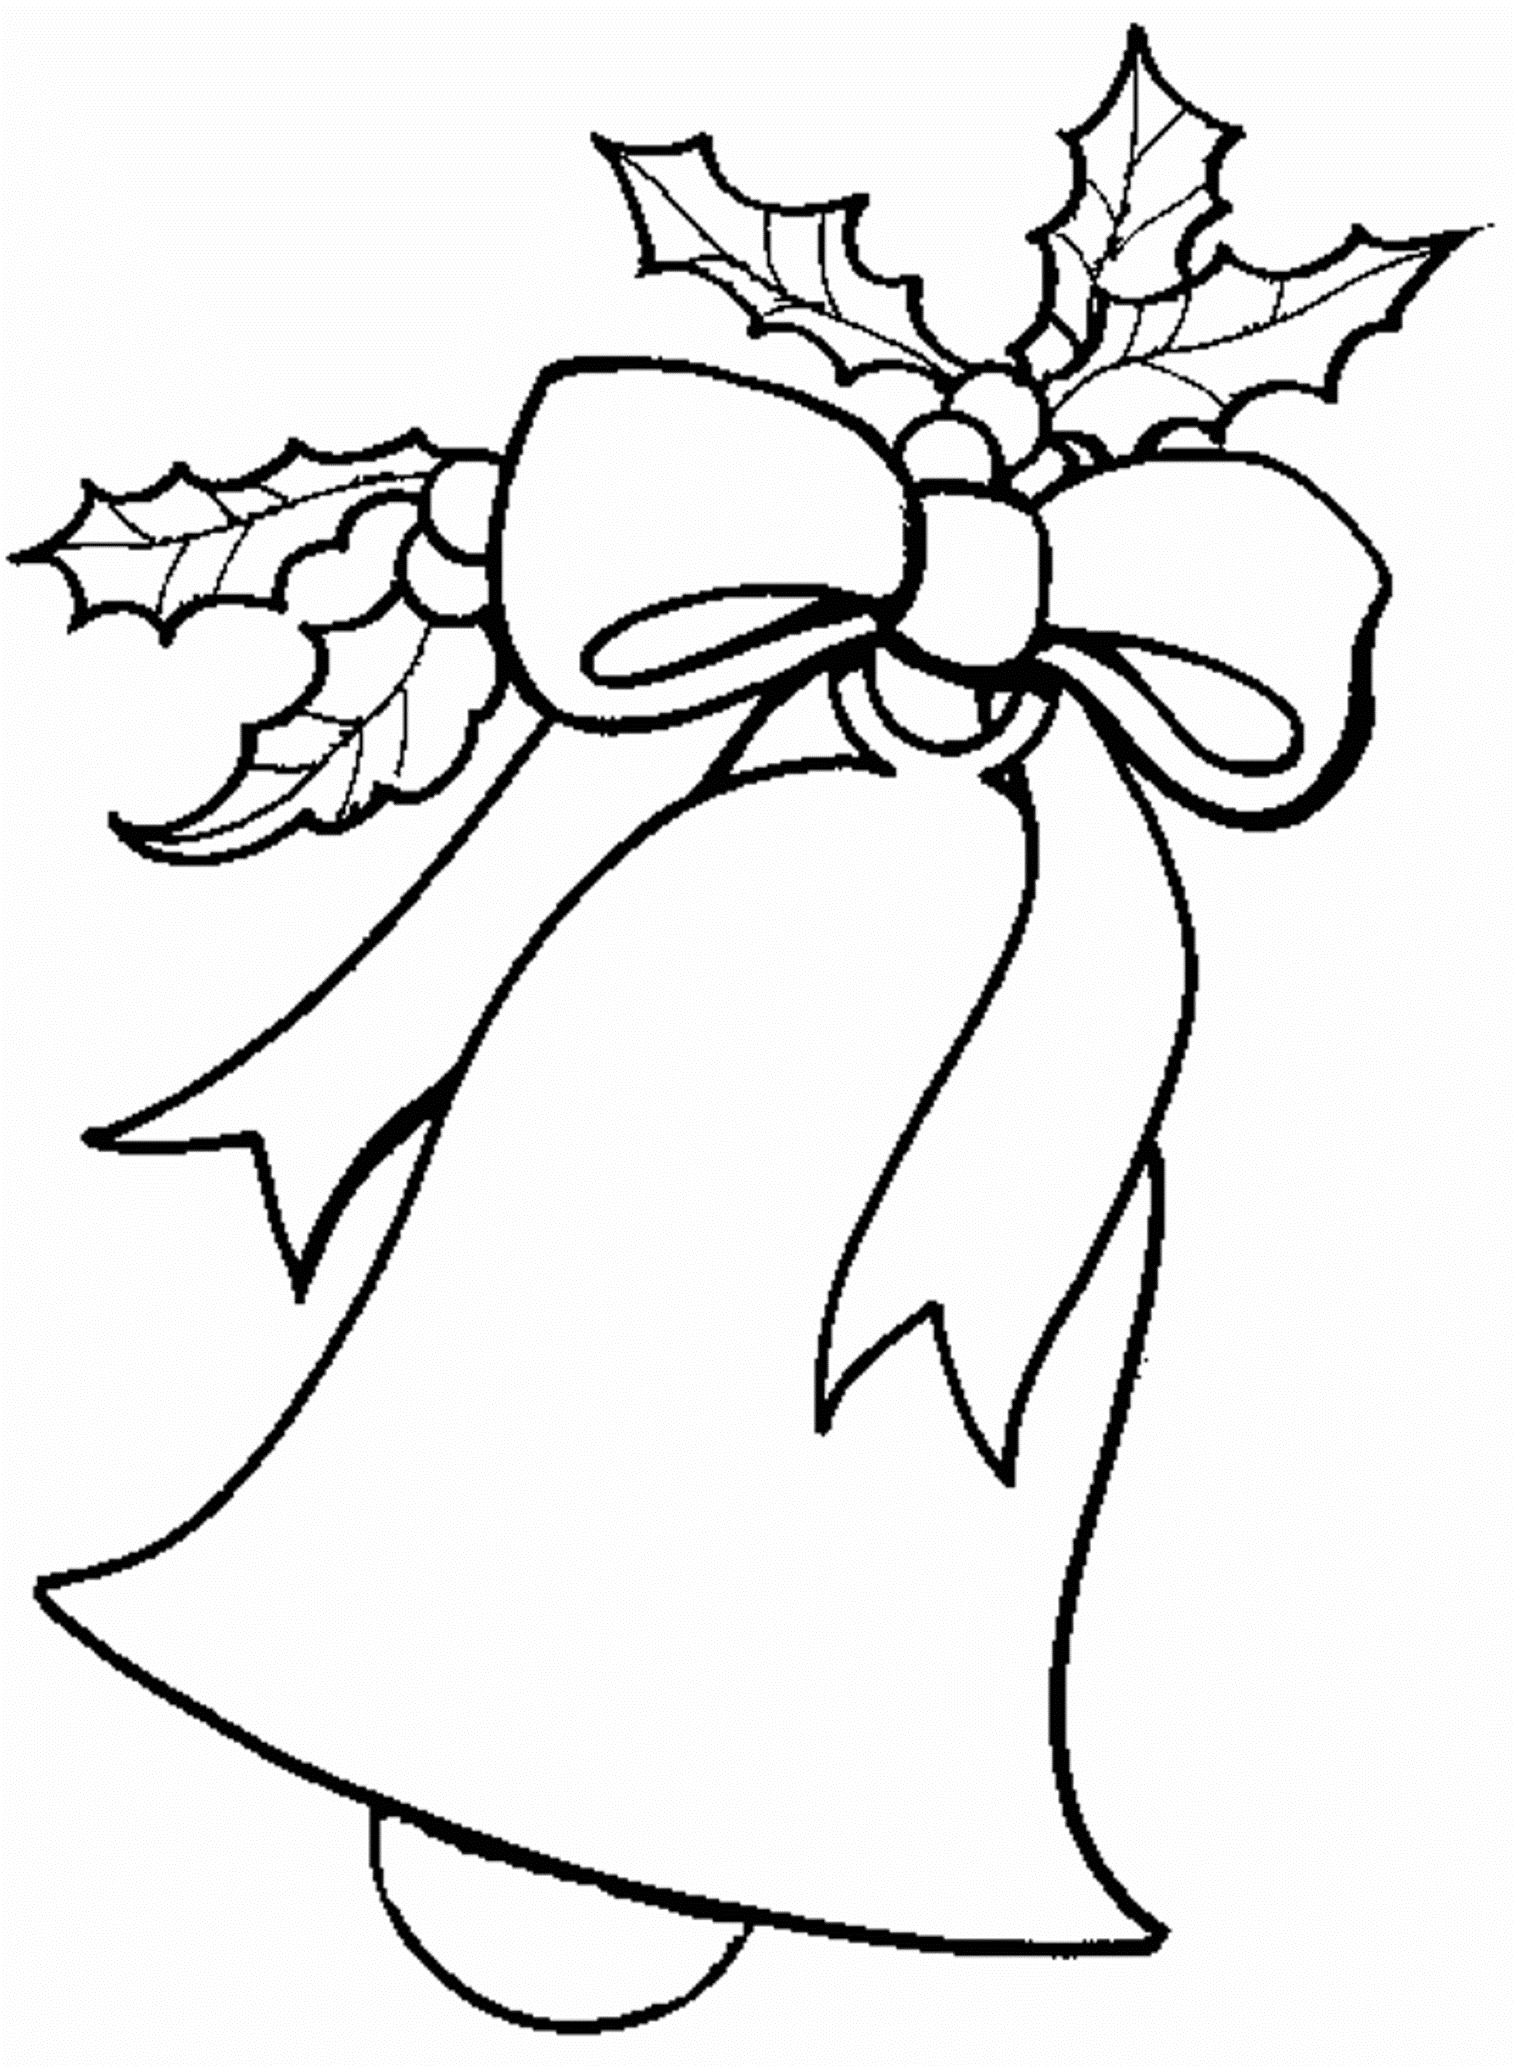 Free Coloring Pages For Christmas Bell Printable | Christmas ...